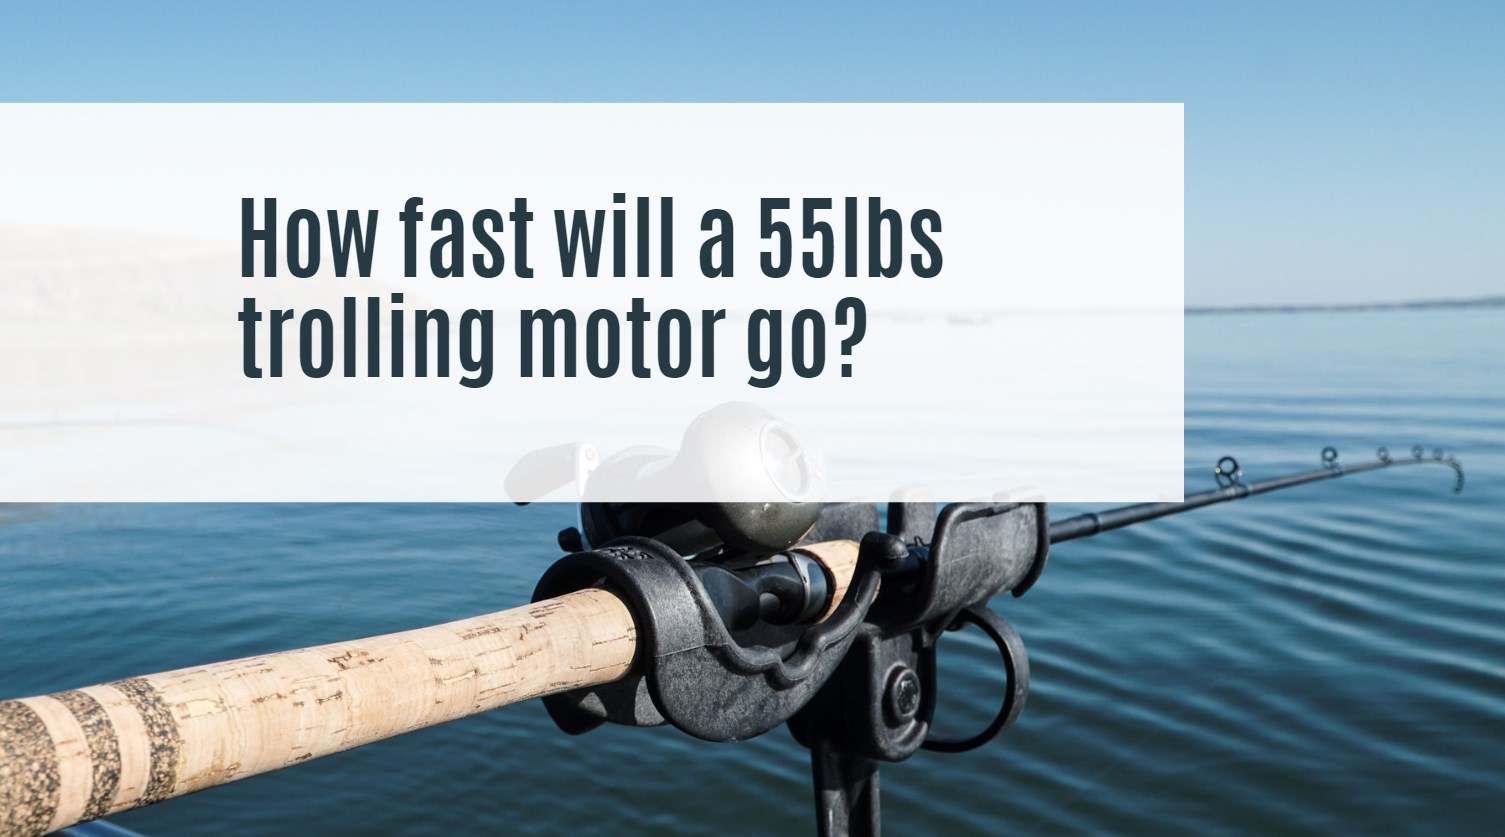 How fast will a 55lb trolling motor go?